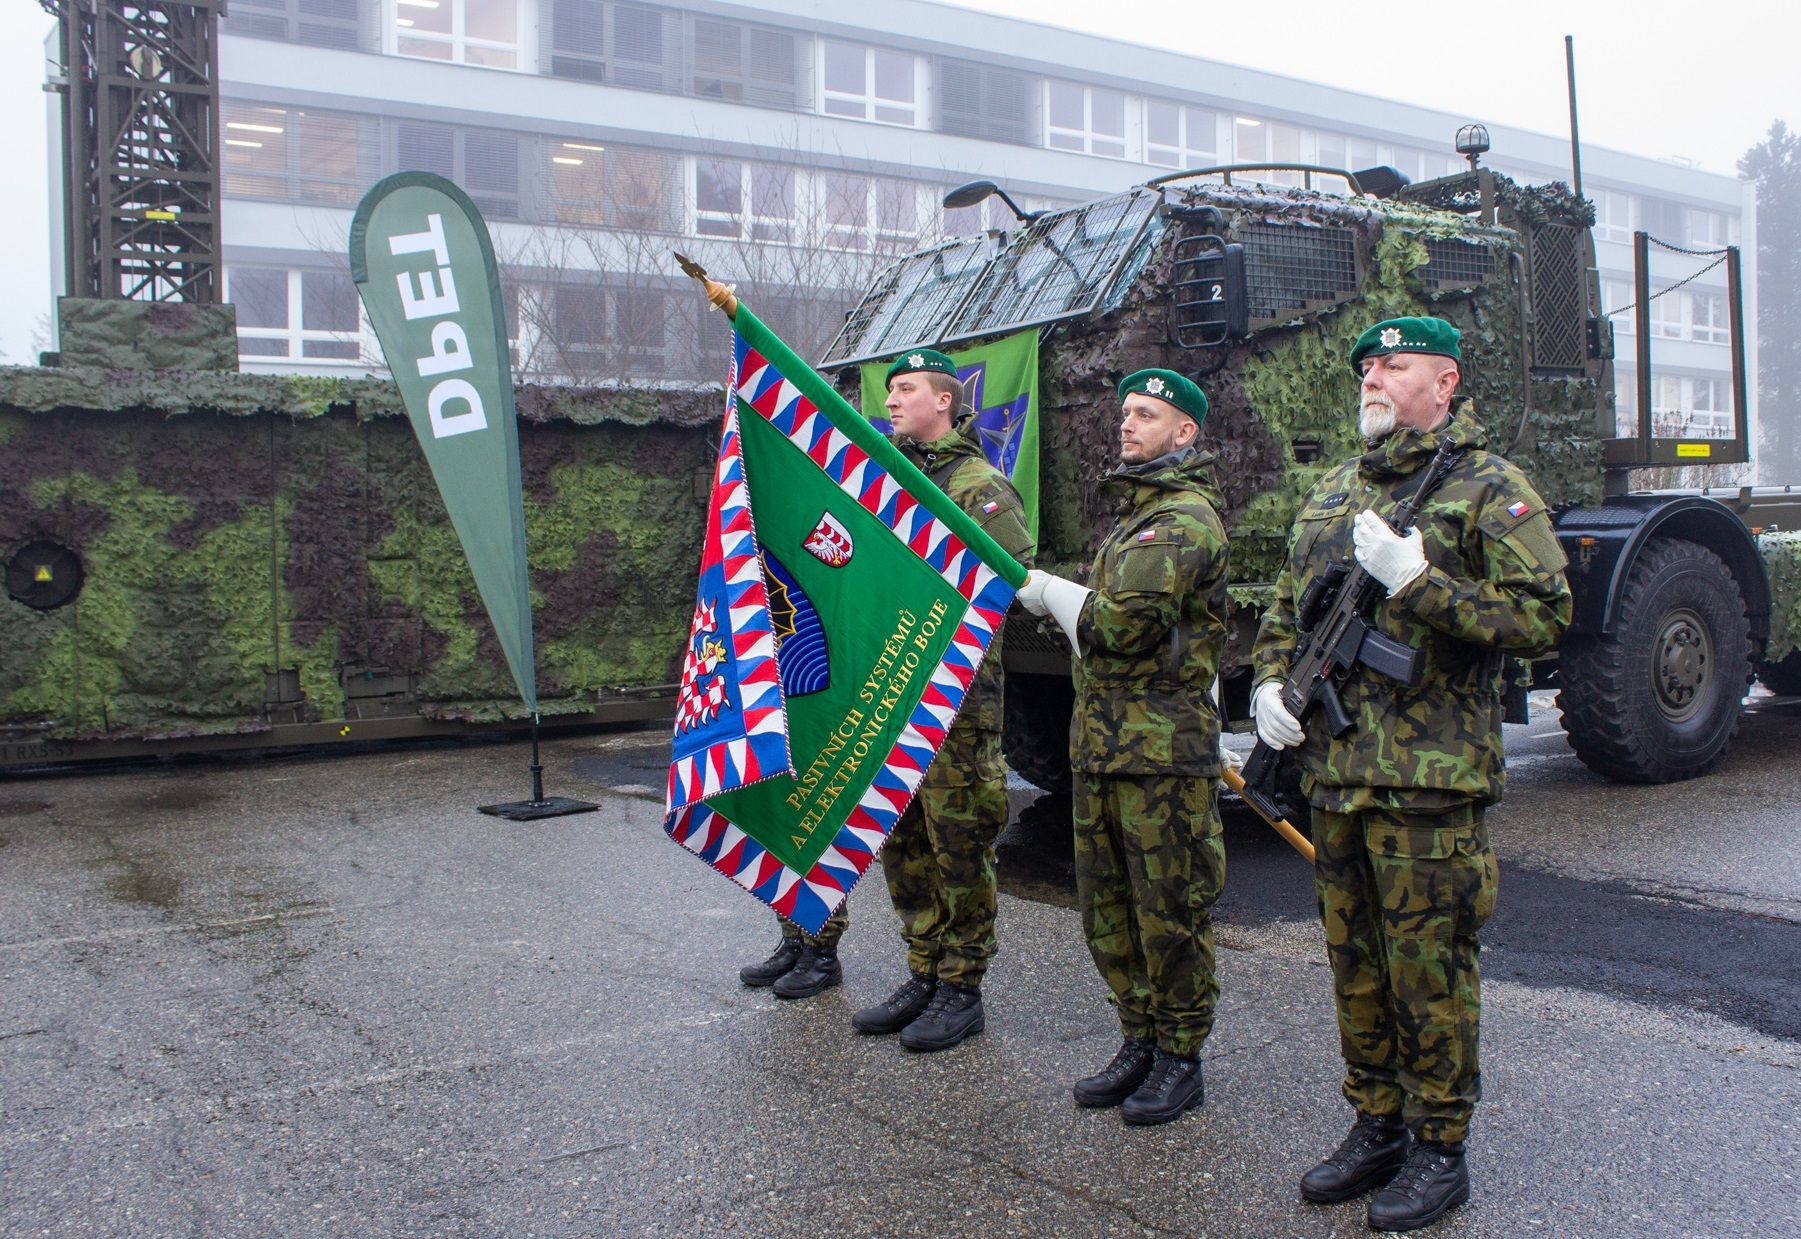 Four soldiers in camouflage stand in attention, facing left. The third from the left is holding a green flag that appears to be the standard banner of an army regiment. It's bordered by a frame with red, white and blue triangle patterns. The fourth soldier is holding a rifle close to his torso. BEhind them, a military truck is parked.